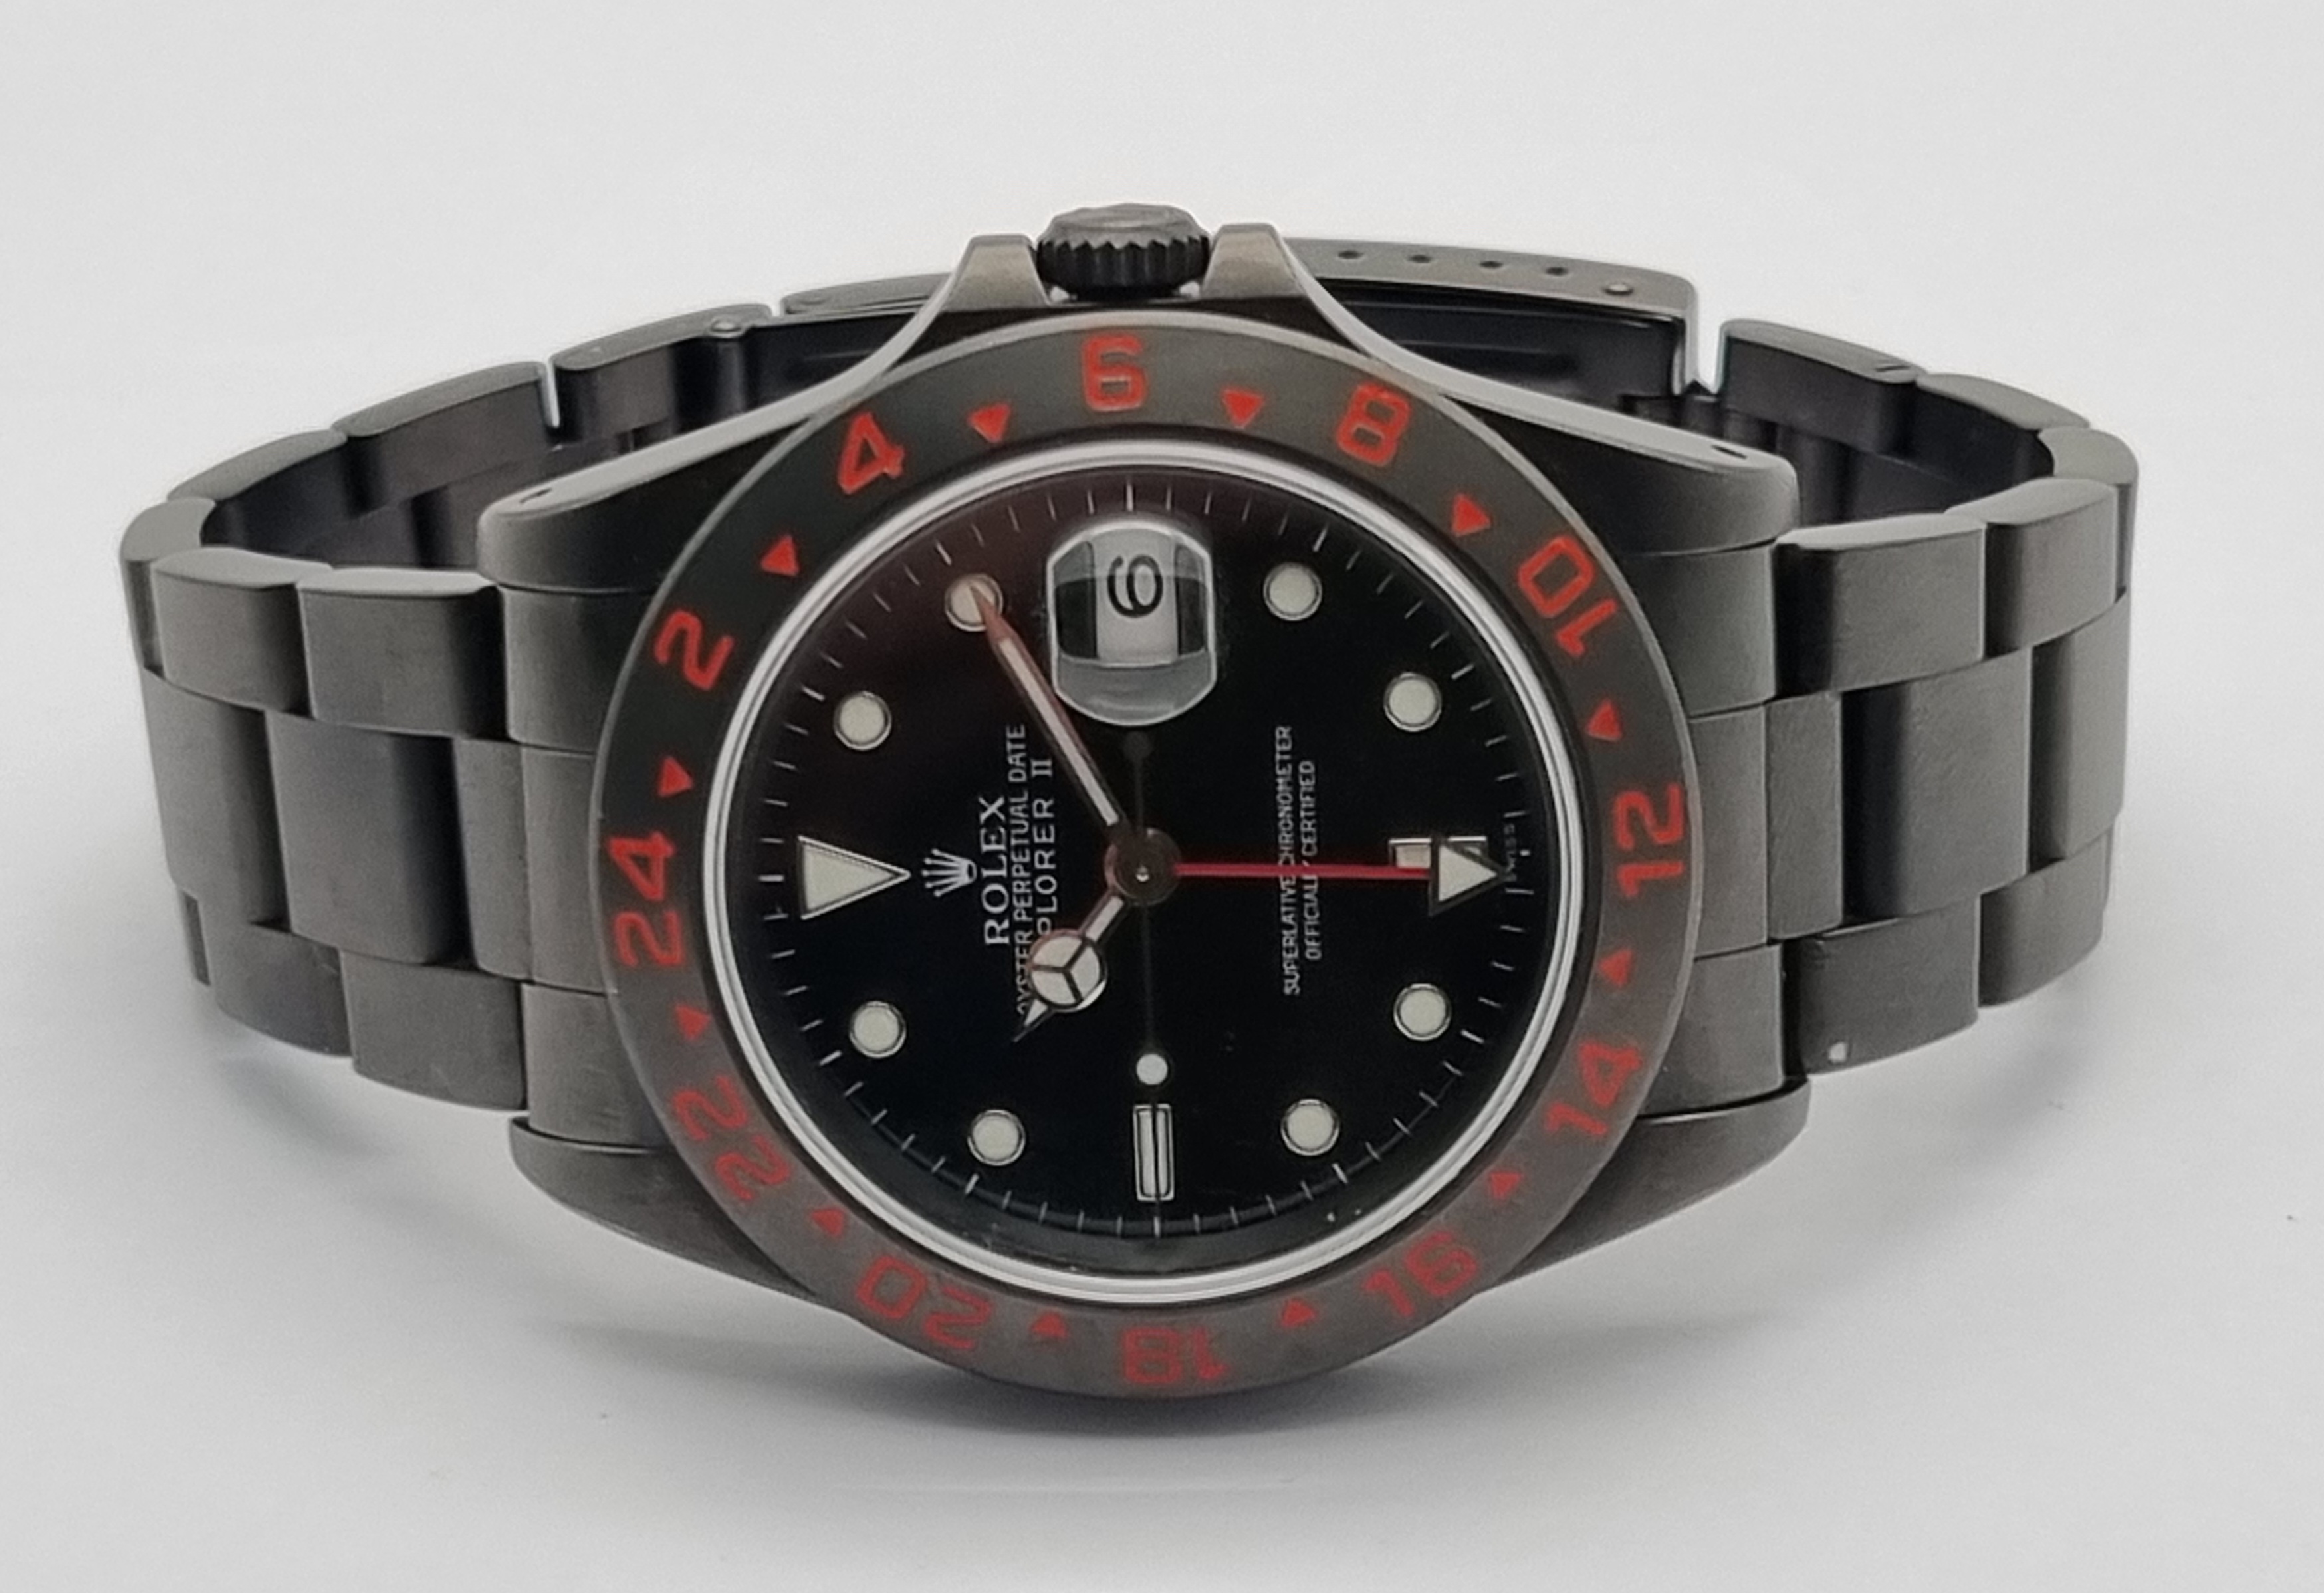 Rolex Explorer II Explorer II Black PVD Coated Stainless Steel Watch Red Numerals Bezel W Series - Box | San Giorgio a Cremano